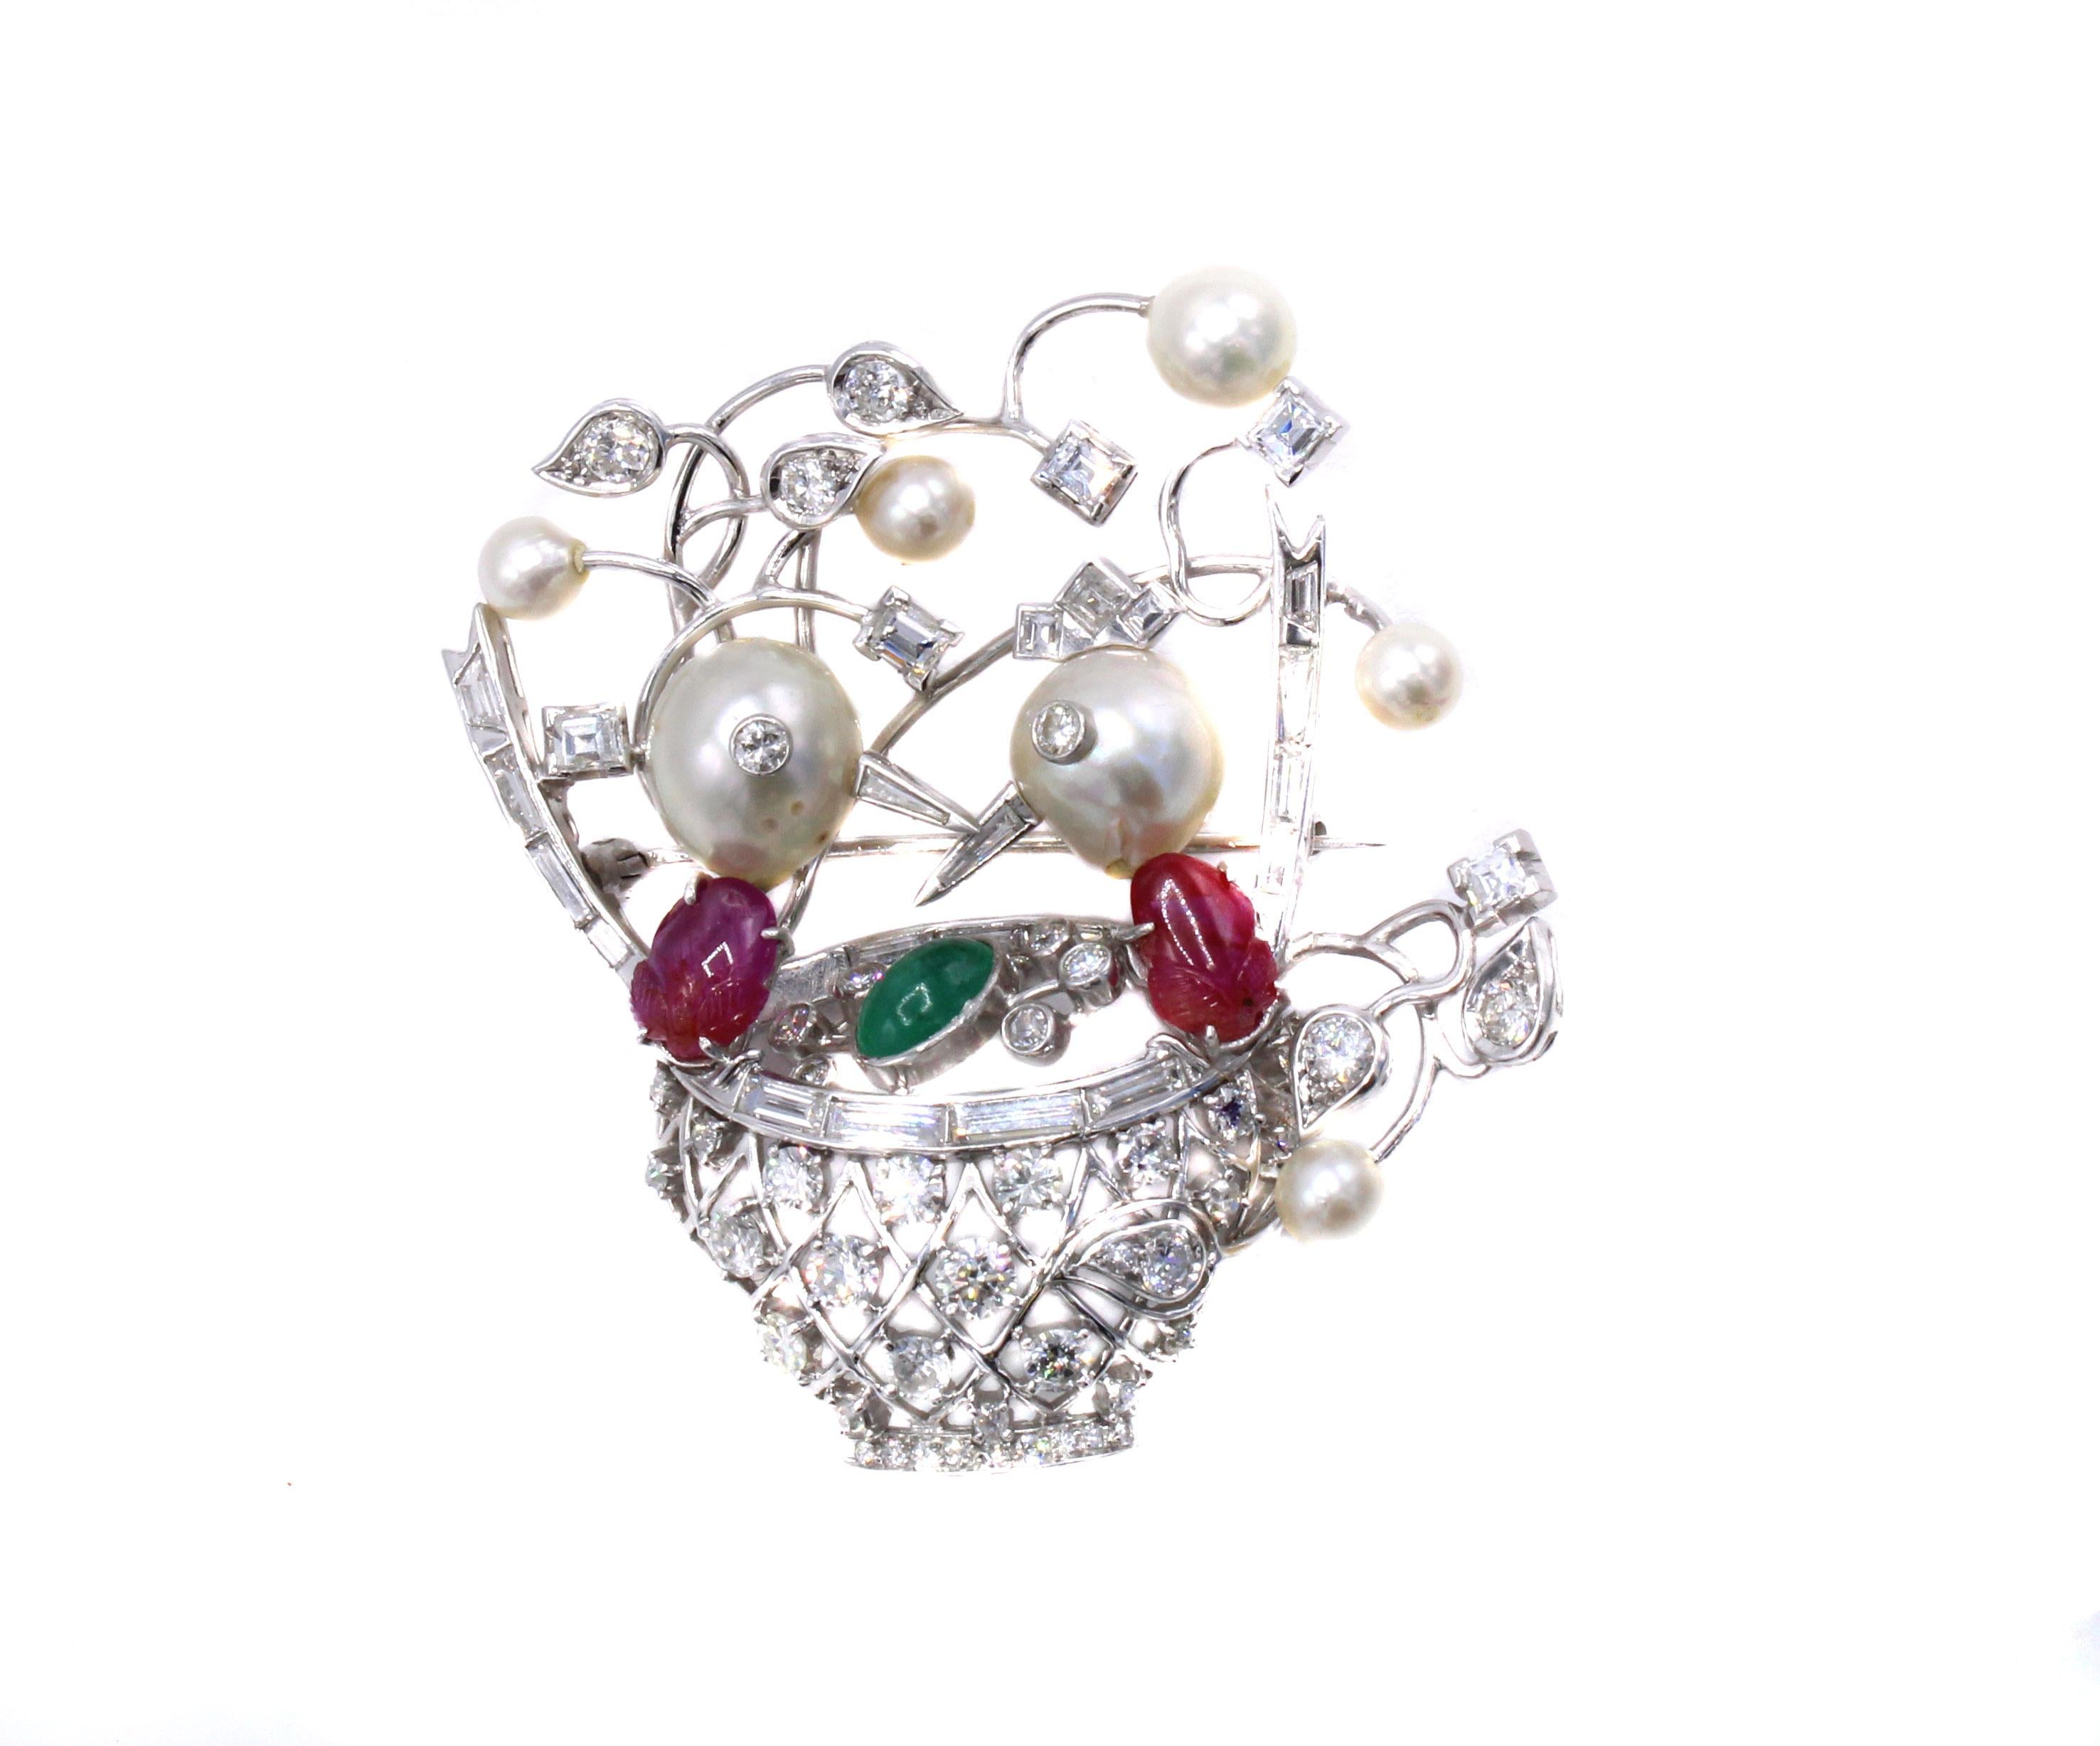 Beautifully designed and masterfully hand-crafted this unique brooch worked in platinum depicts a pair of birds in a birds nest. The whimsical over-sized heads are cultured pearls bezel set with round brilliant cut diamonds which each have a pointed